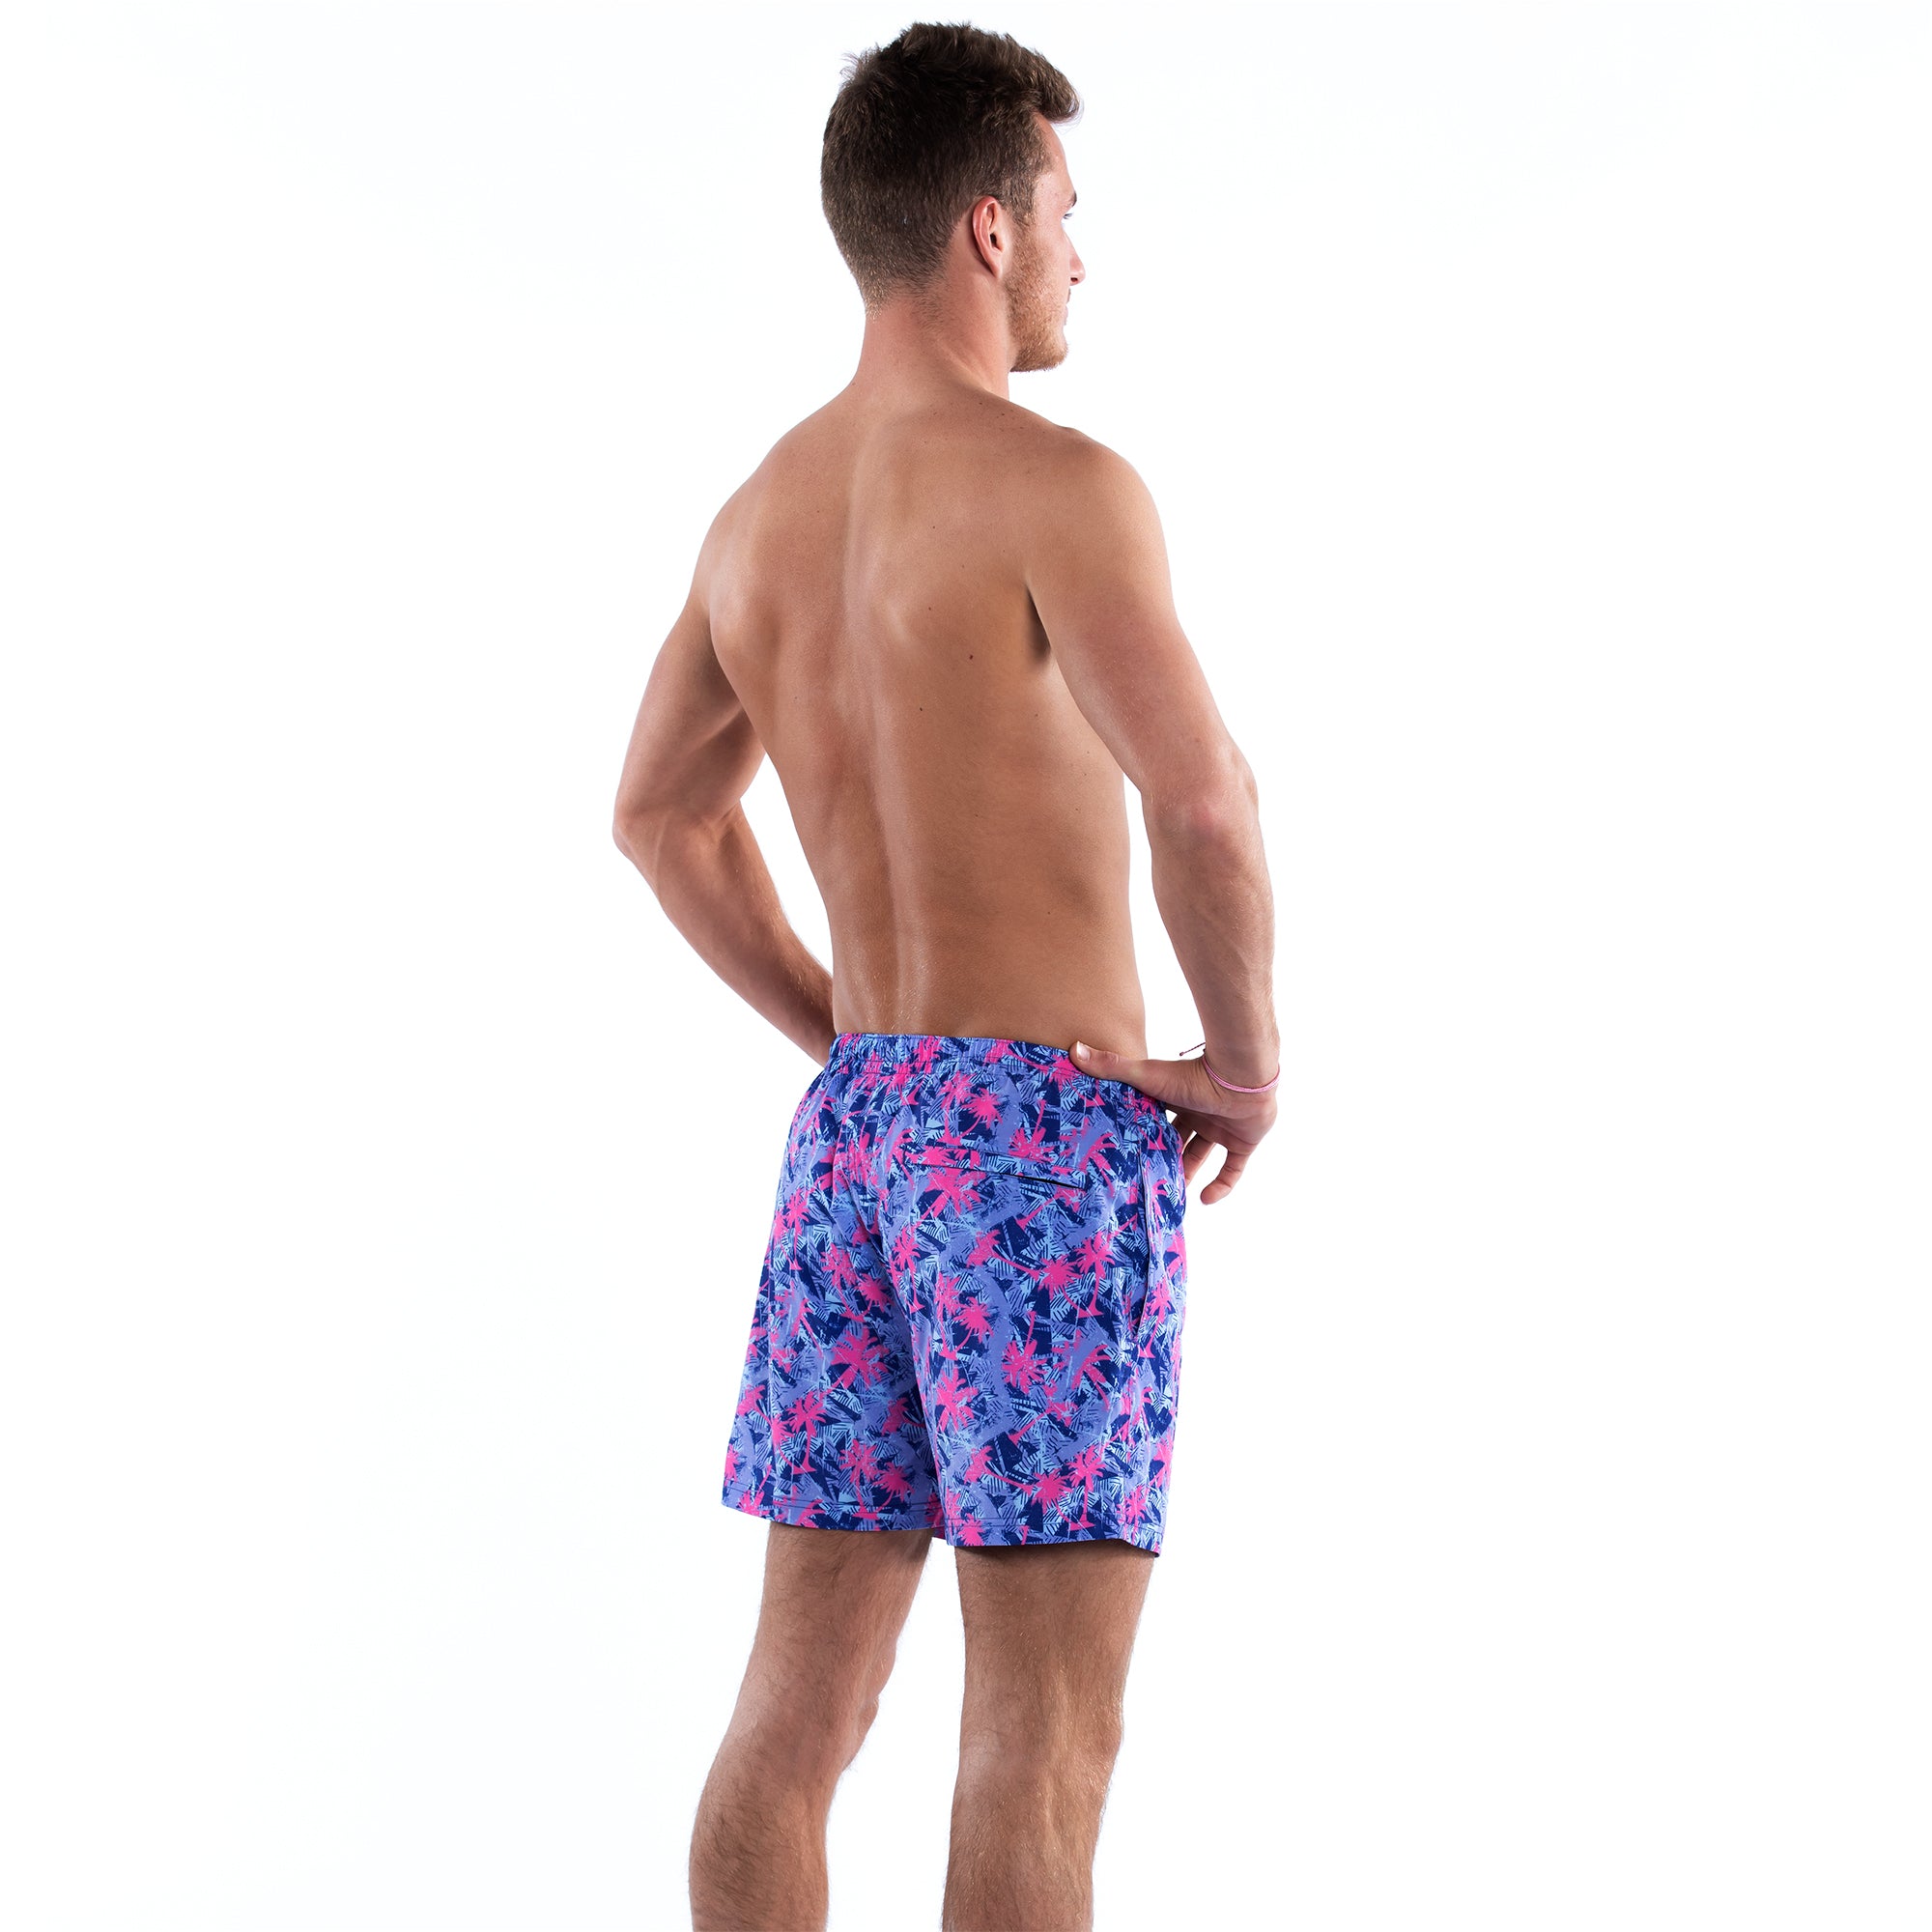 Mesh Lined 5 Swim Trunks - Tasty Waves – Third Wave Style